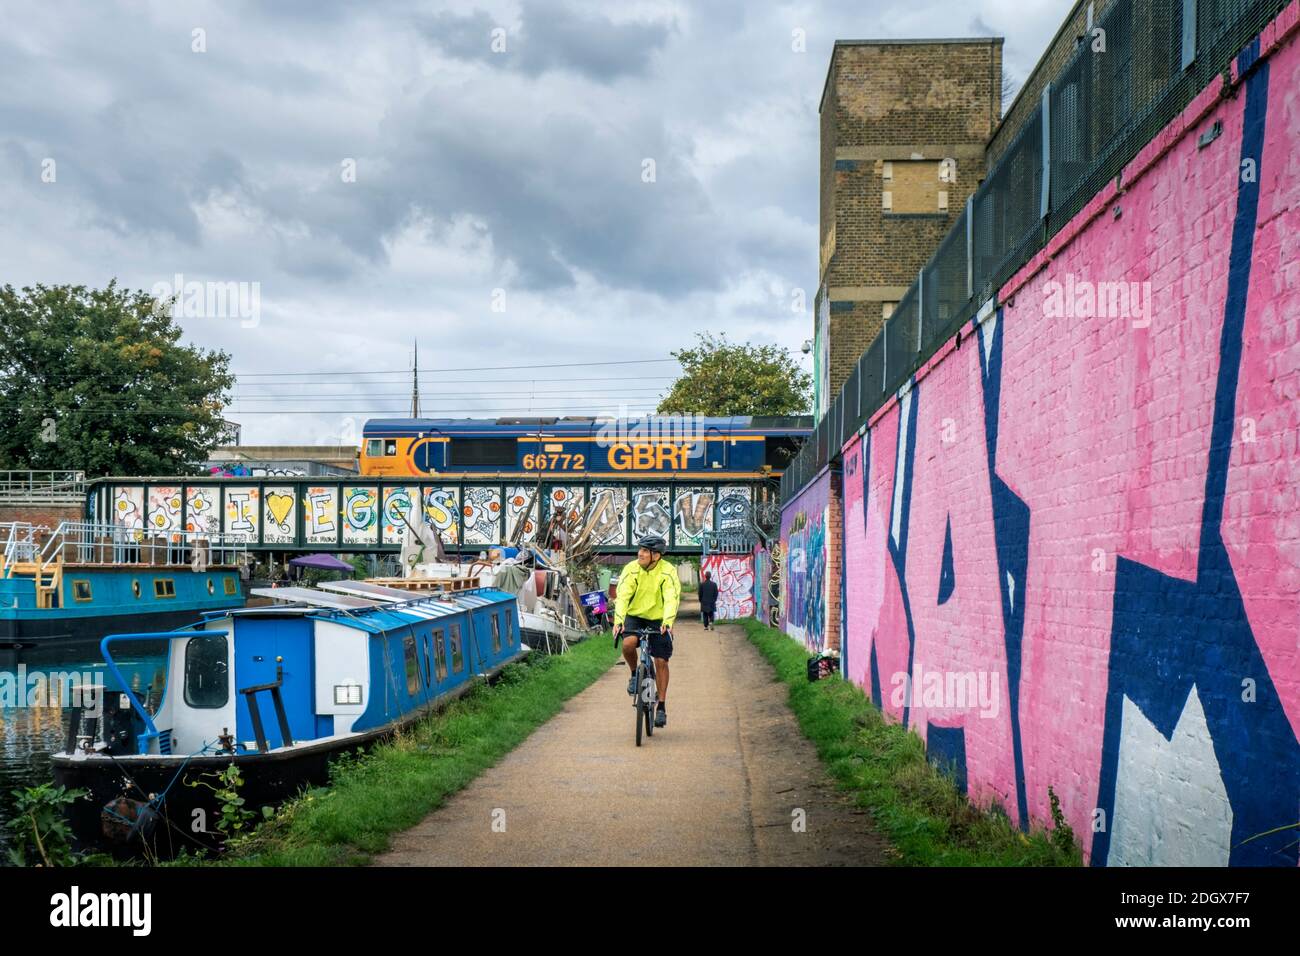 A cyclist on the Lea Valley towpath, GBRf freight train, houseboats, street art, Legacy Wharf, Stratford, East London, E15 2PN, UK Stock Photo